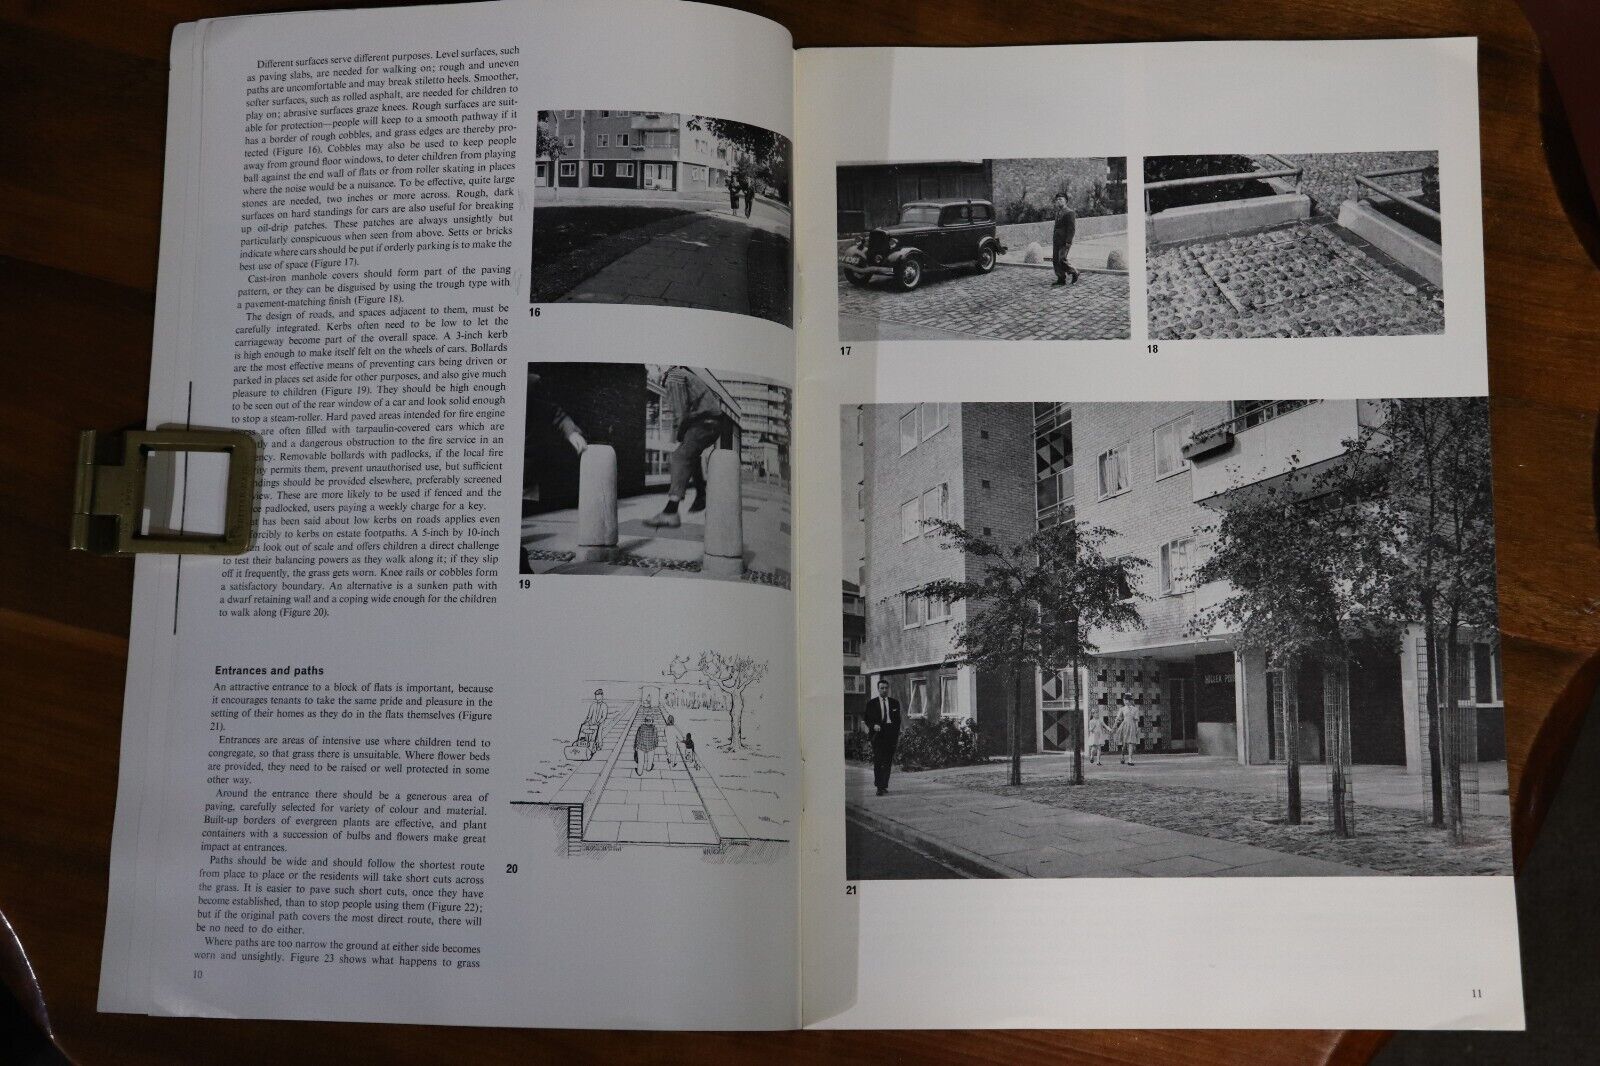 Landscaping For Flats: London - 1963 - British Town Planning Architecture Book